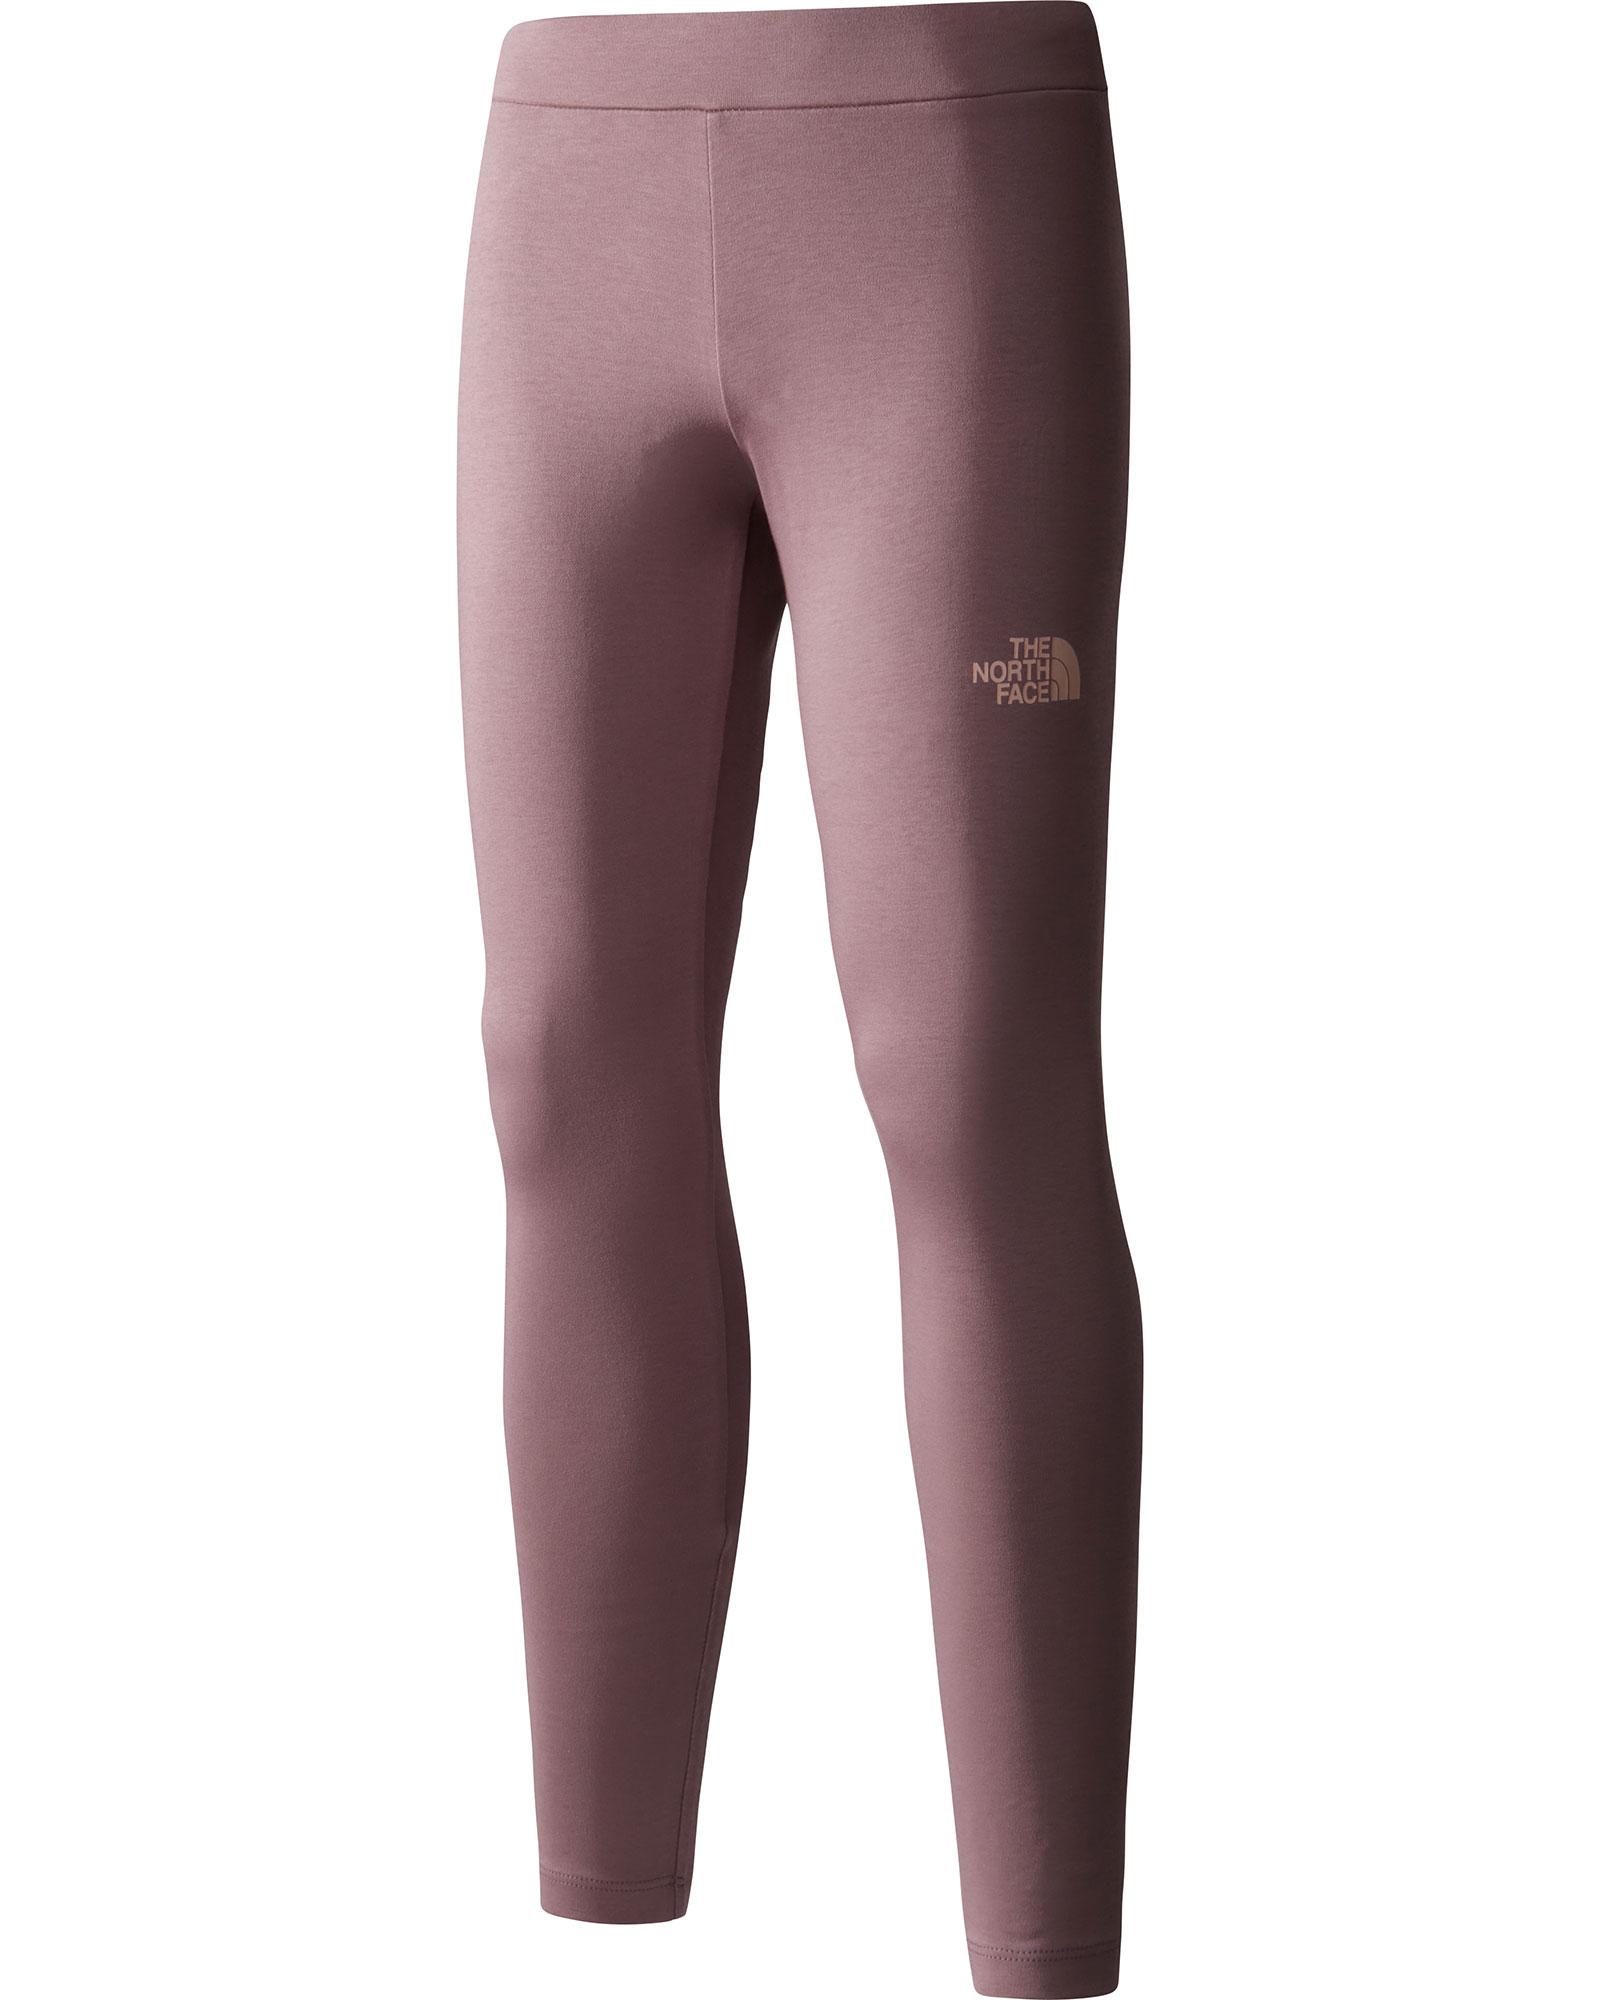 The North Face Girl’s Graphic Leggings - Fawn Grey L